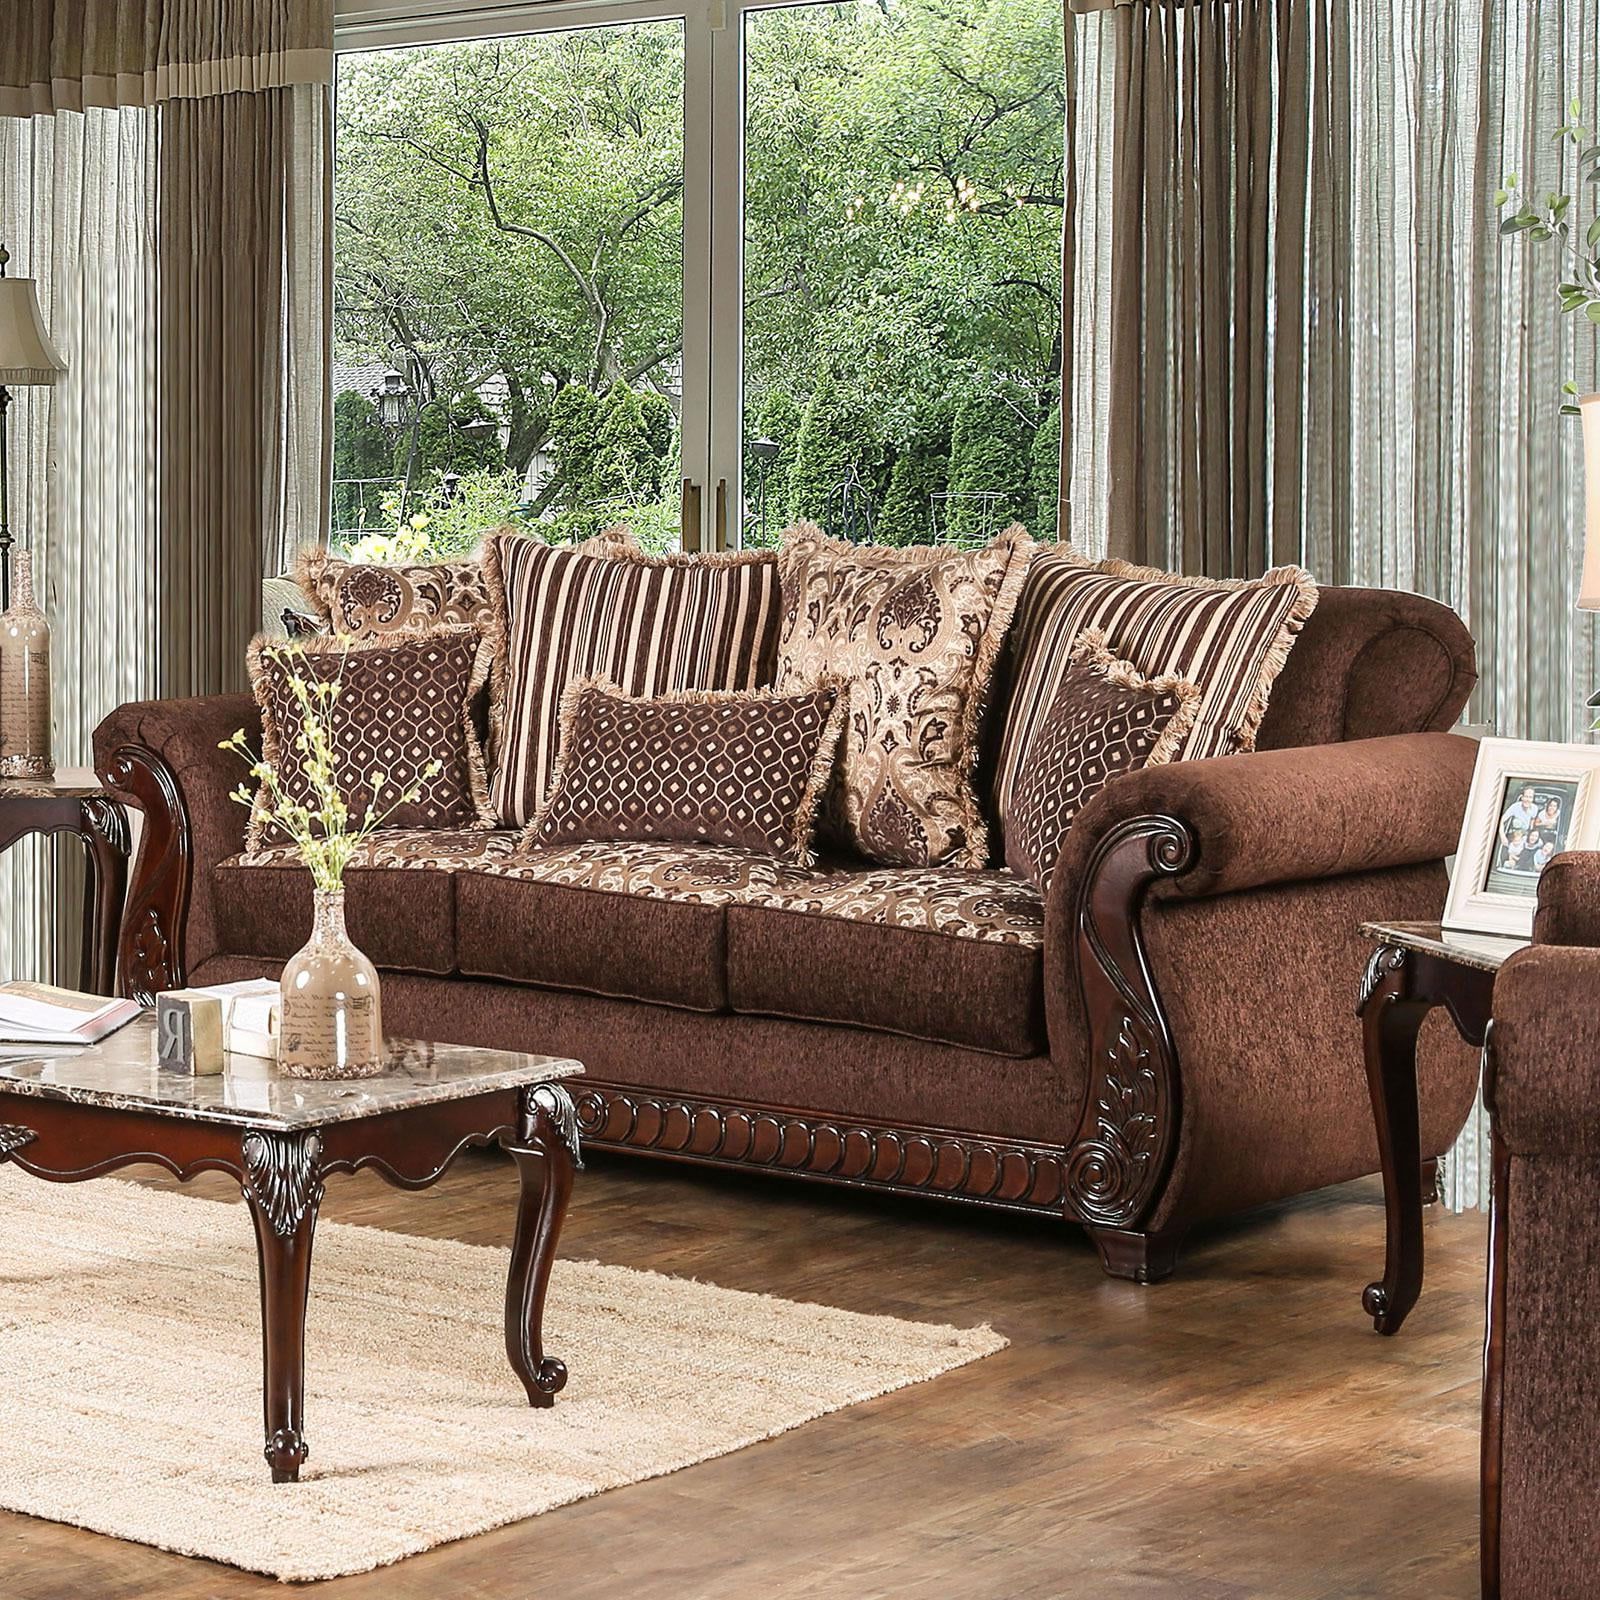 Traditional Fabric Upholstery Sofa In Brown Sm6109 Tabithafoa Group Throughout Sofas In Pattern (View 14 of 20)